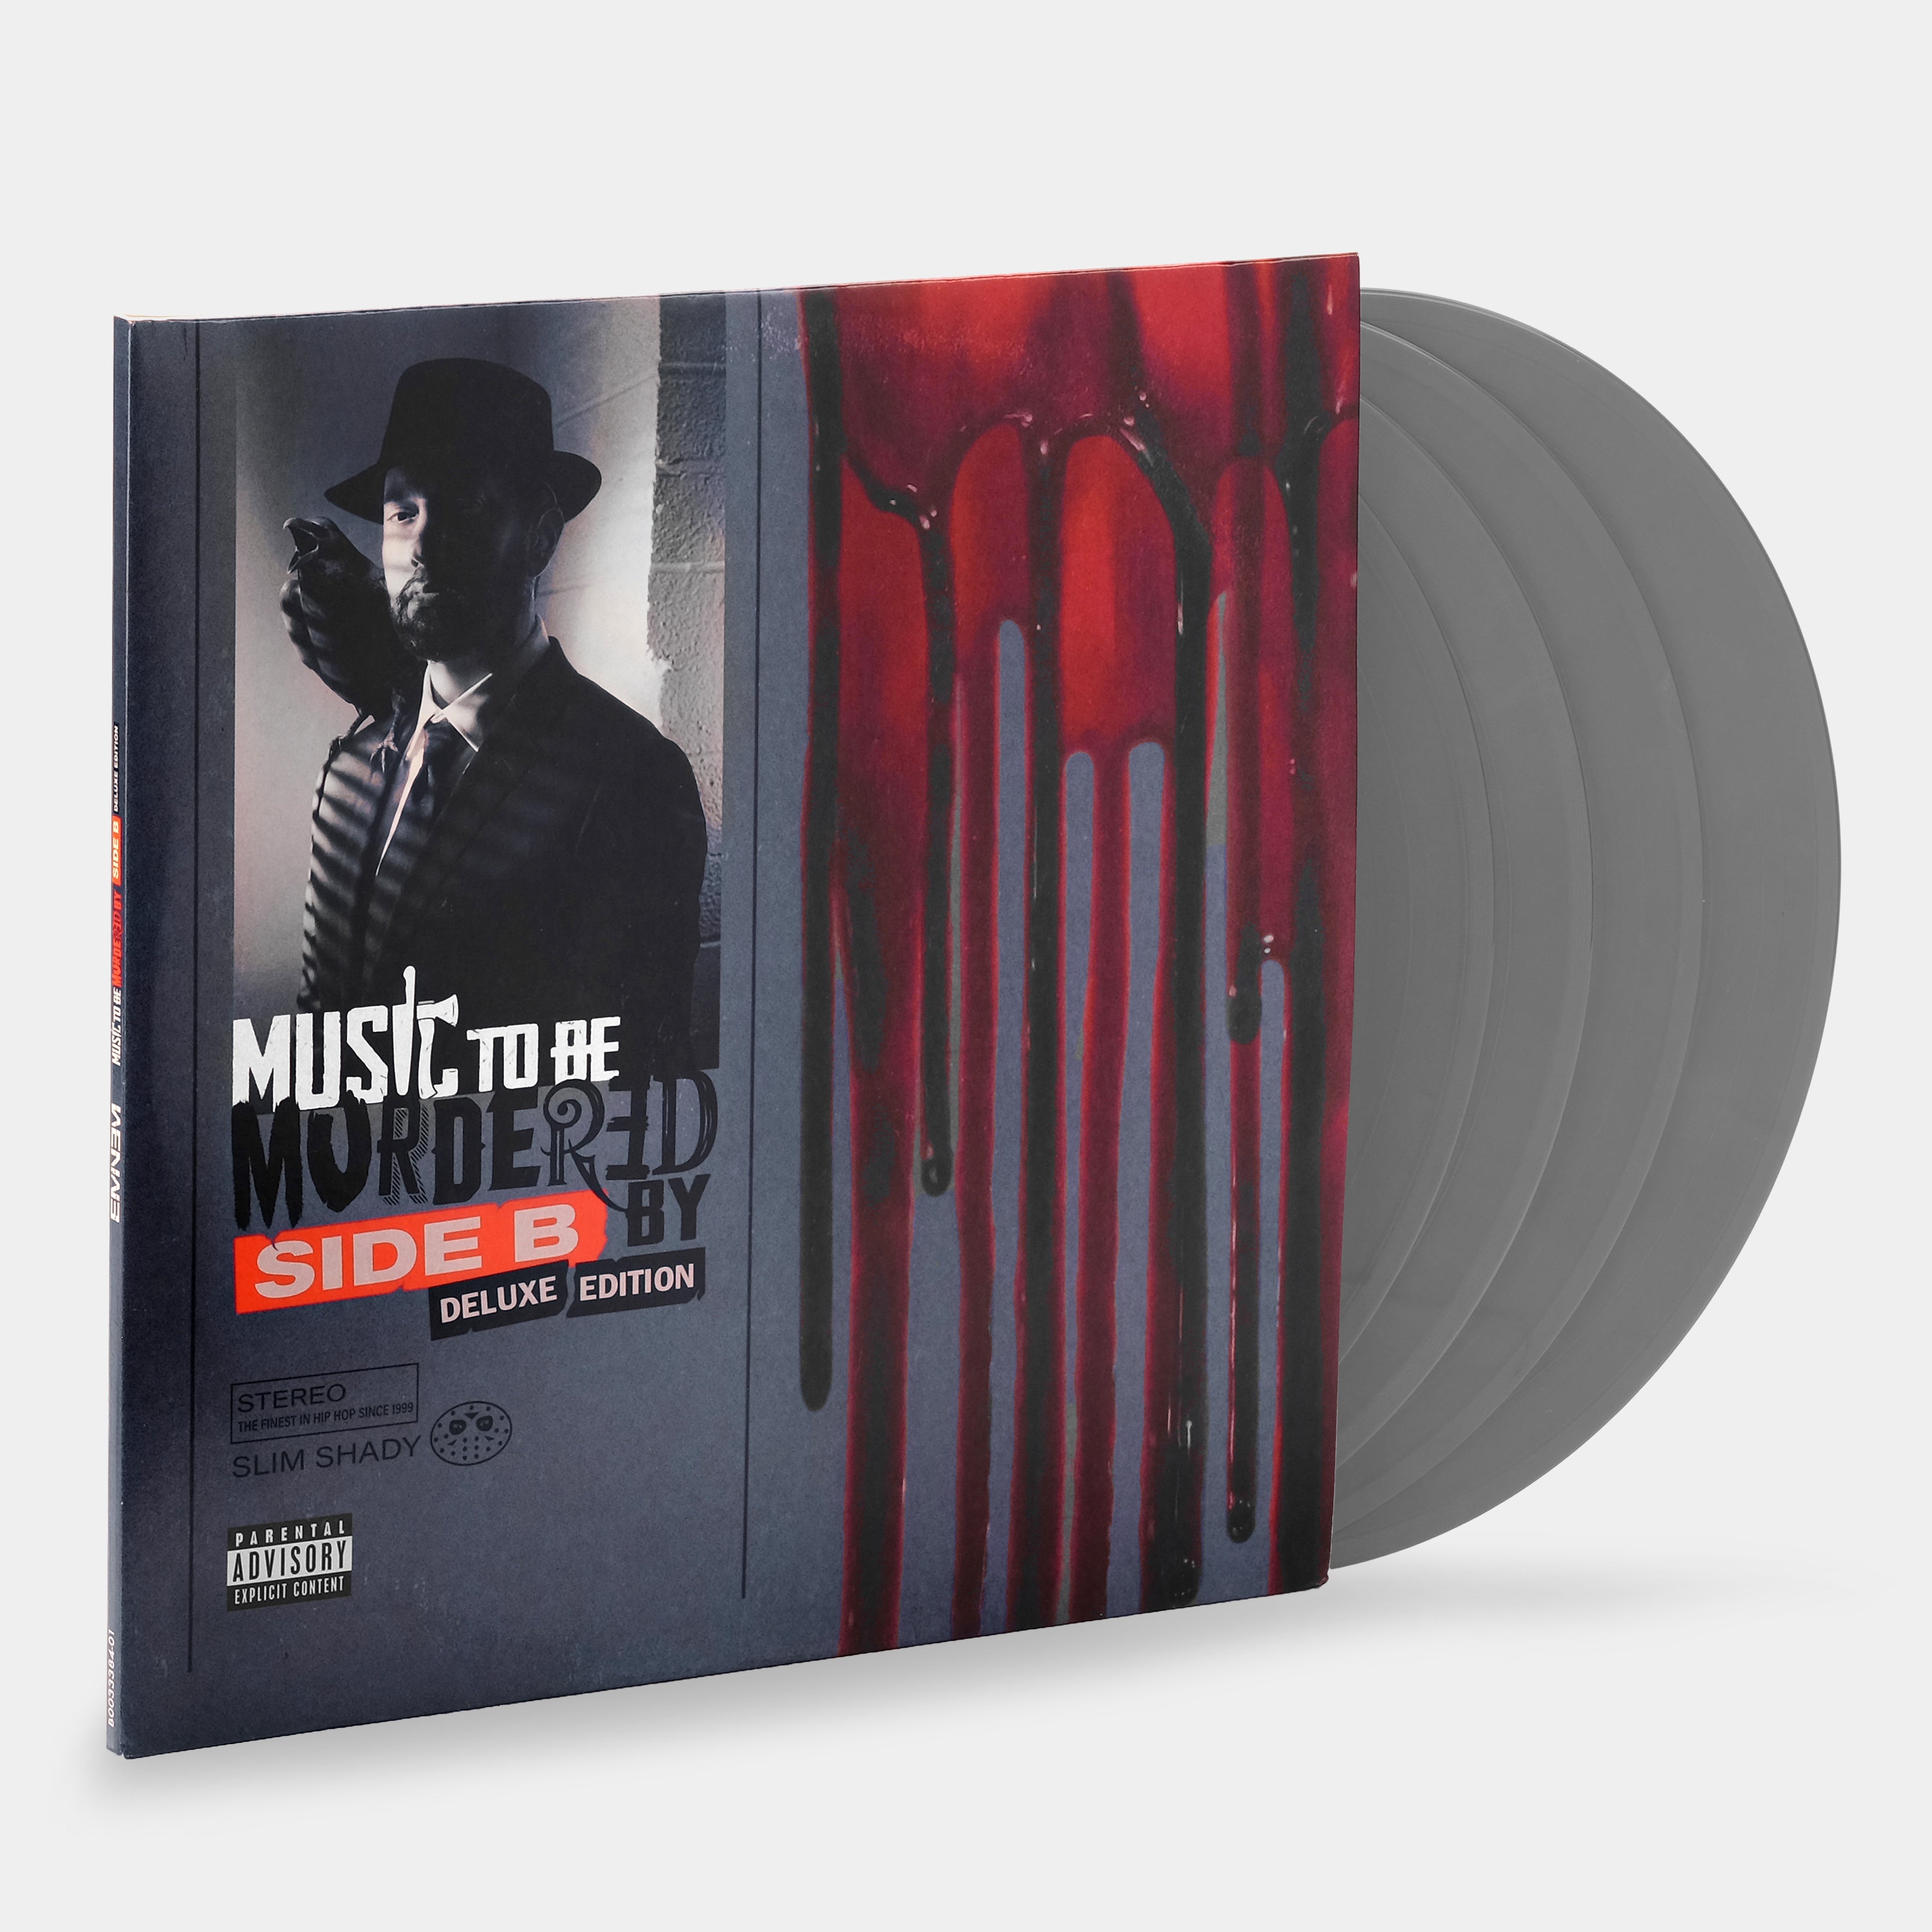 Eminem - Music To Be Murdered By: Side B (Deluxe Edition) 4xLP Grey Vinyl Record